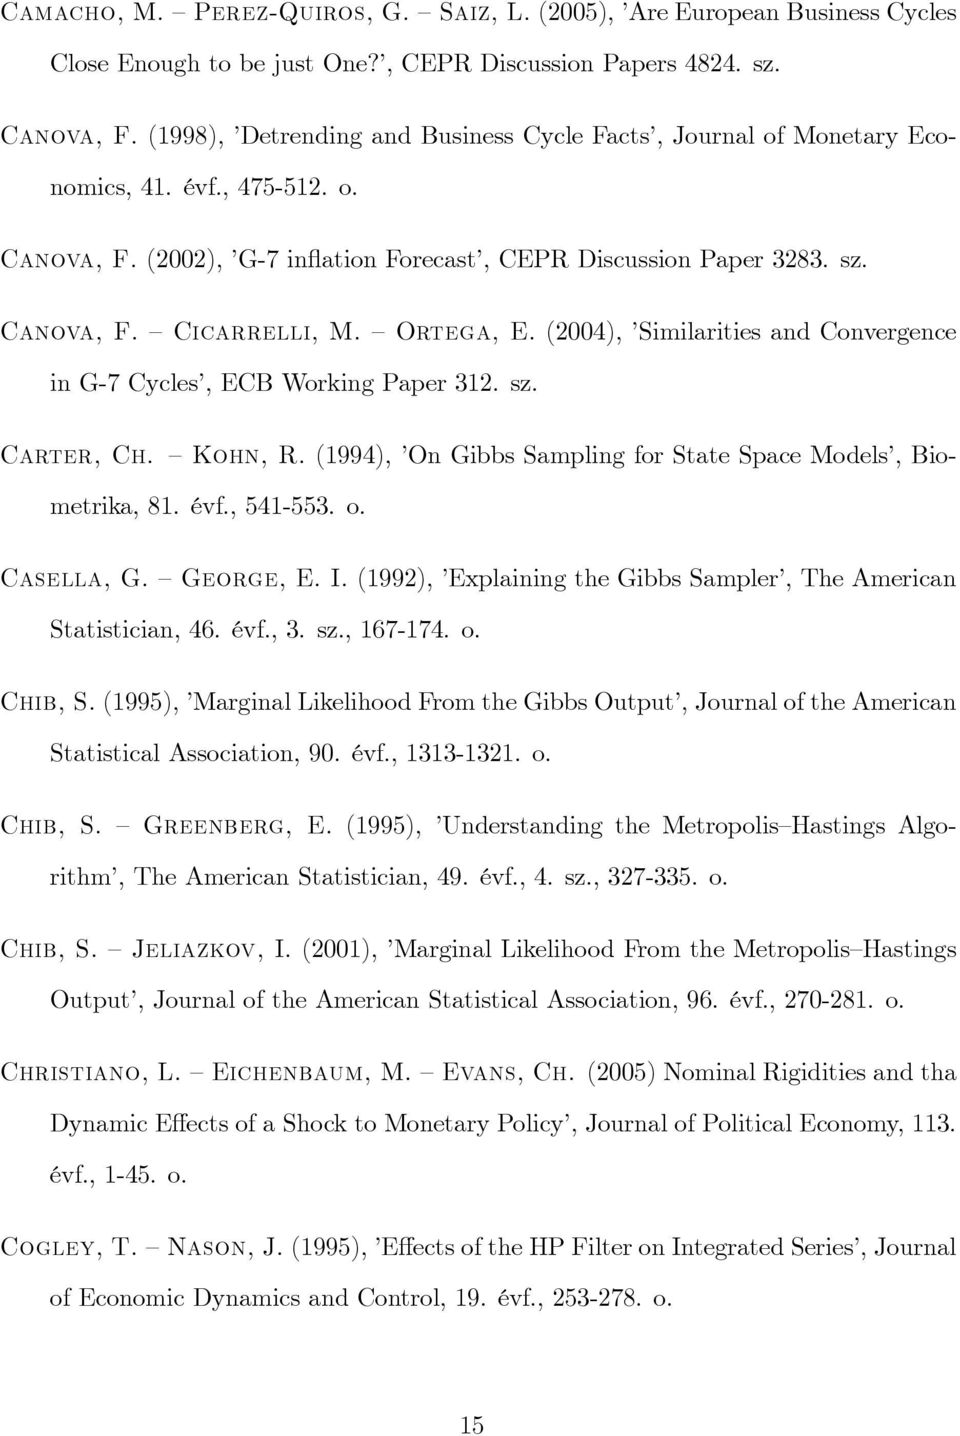 Ortega, E. (2004), Similarities and Convergence in G-7 Cycles, ECB Working Paper 312. sz. Carter, Ch. Kohn, R. (1994), On Gibbs Sampling for State Space Models, Biometrika, 81. évf., 541-553. o.